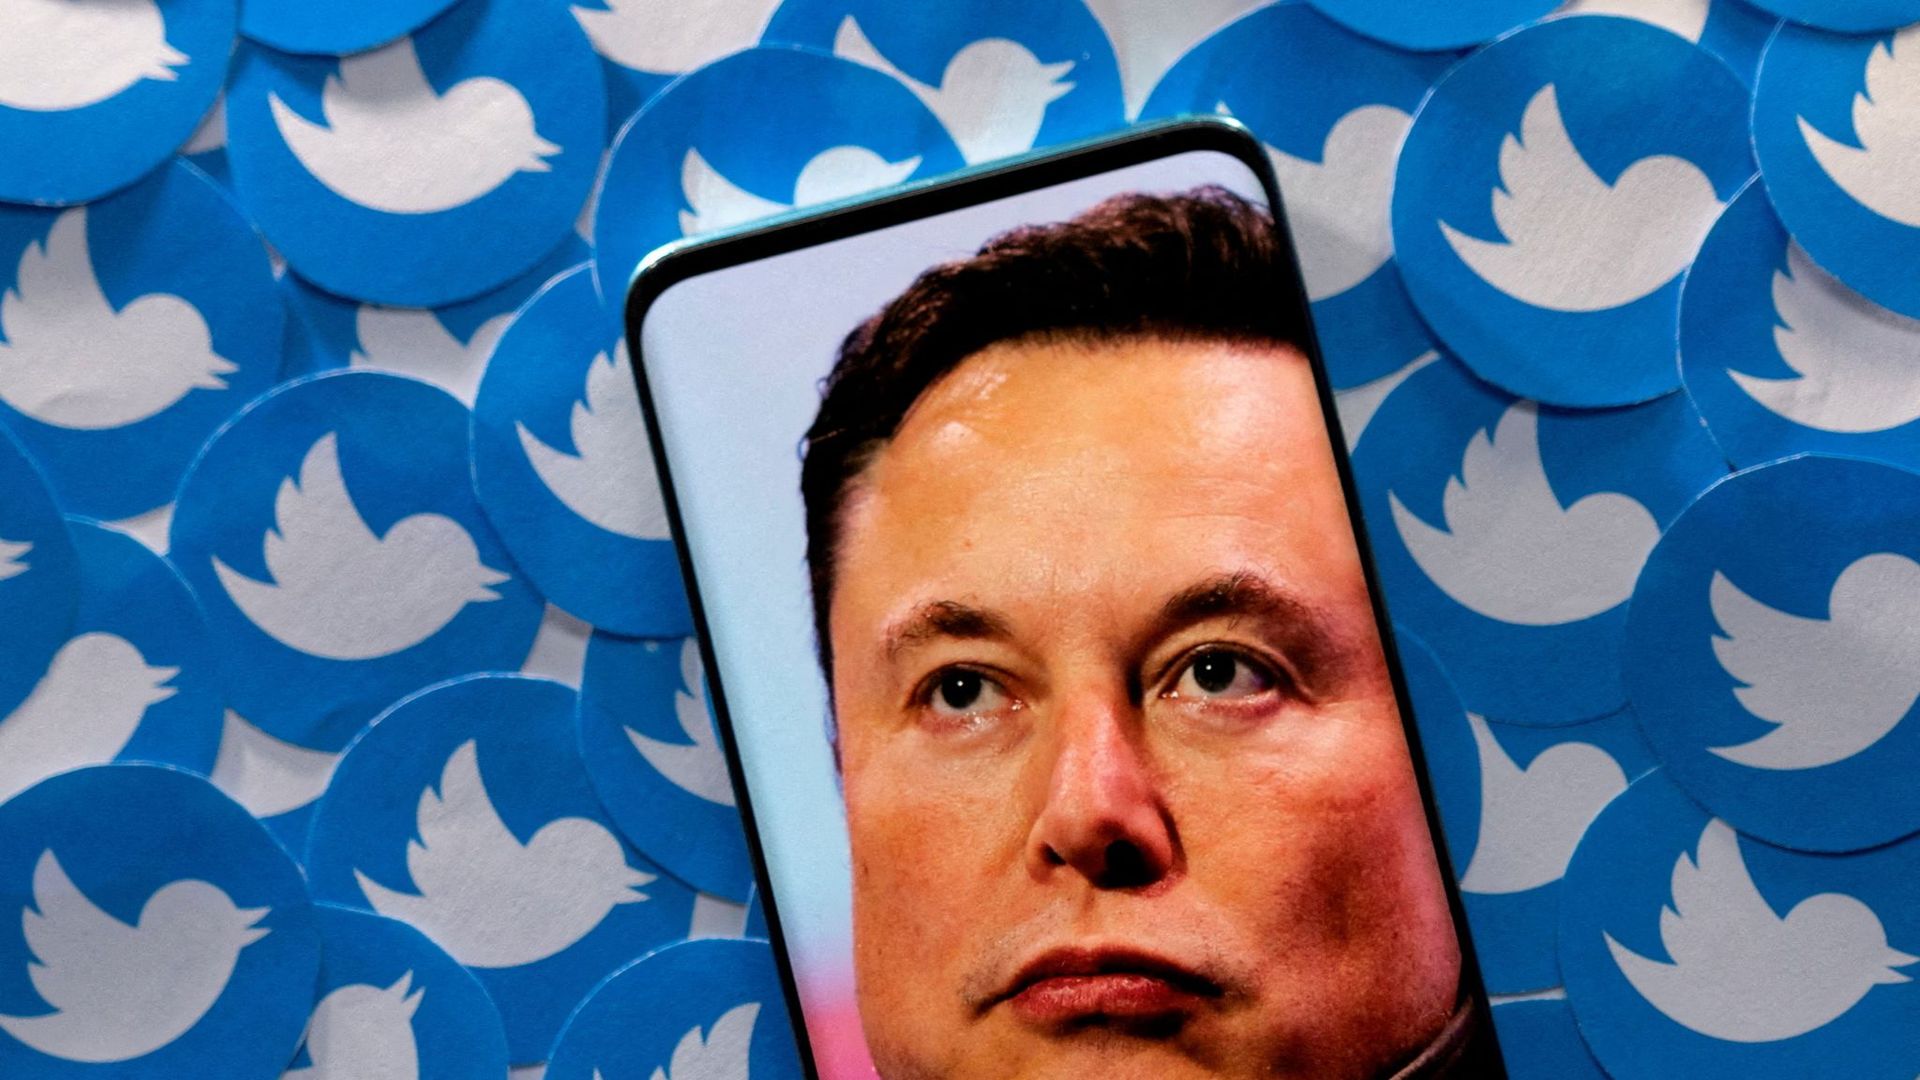 In this article, we are going to be covering all the details about the Elon Musk federal investigation you need to know, which popped up because of the Twitter deal.